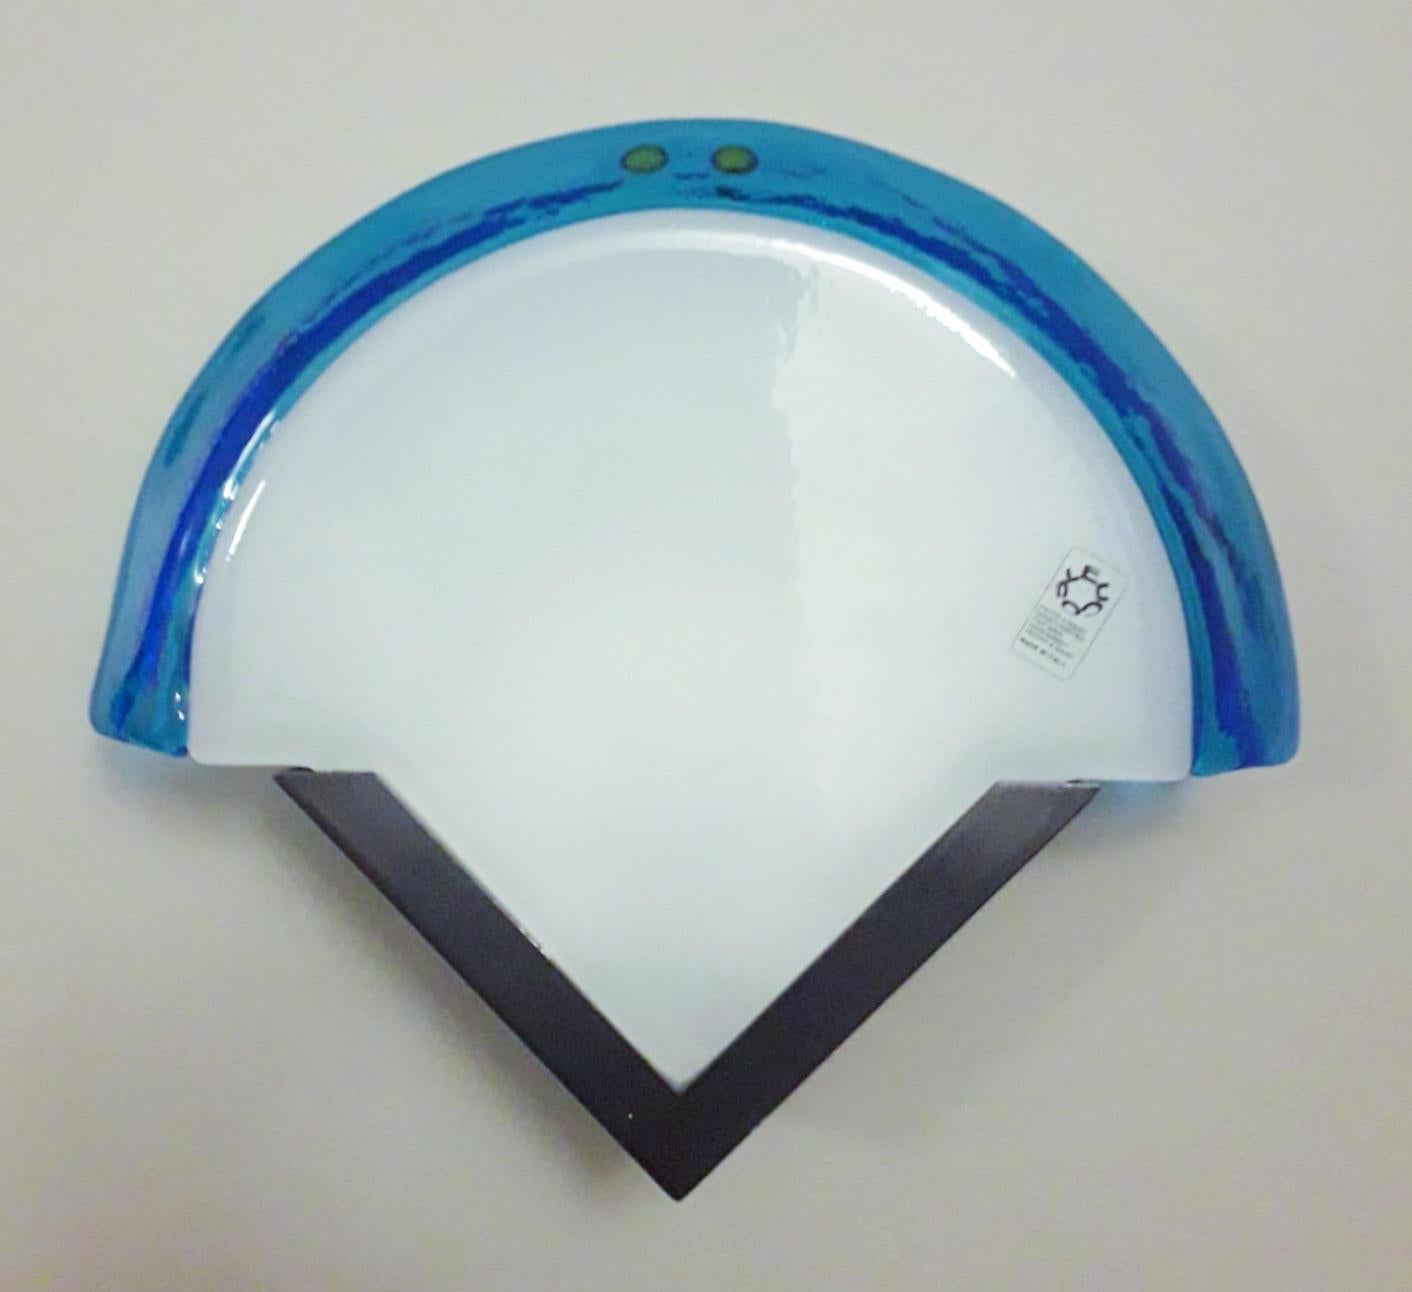 Vintage Italian wall lights with fan shaped blue and white Murano glass shades mounted on metal frames / made in Italy by Leucos, circa 1960s
Original sticker on glass and mark on frame
Measures: height 10.5 inches, width 12.5 inches, depth 3.5